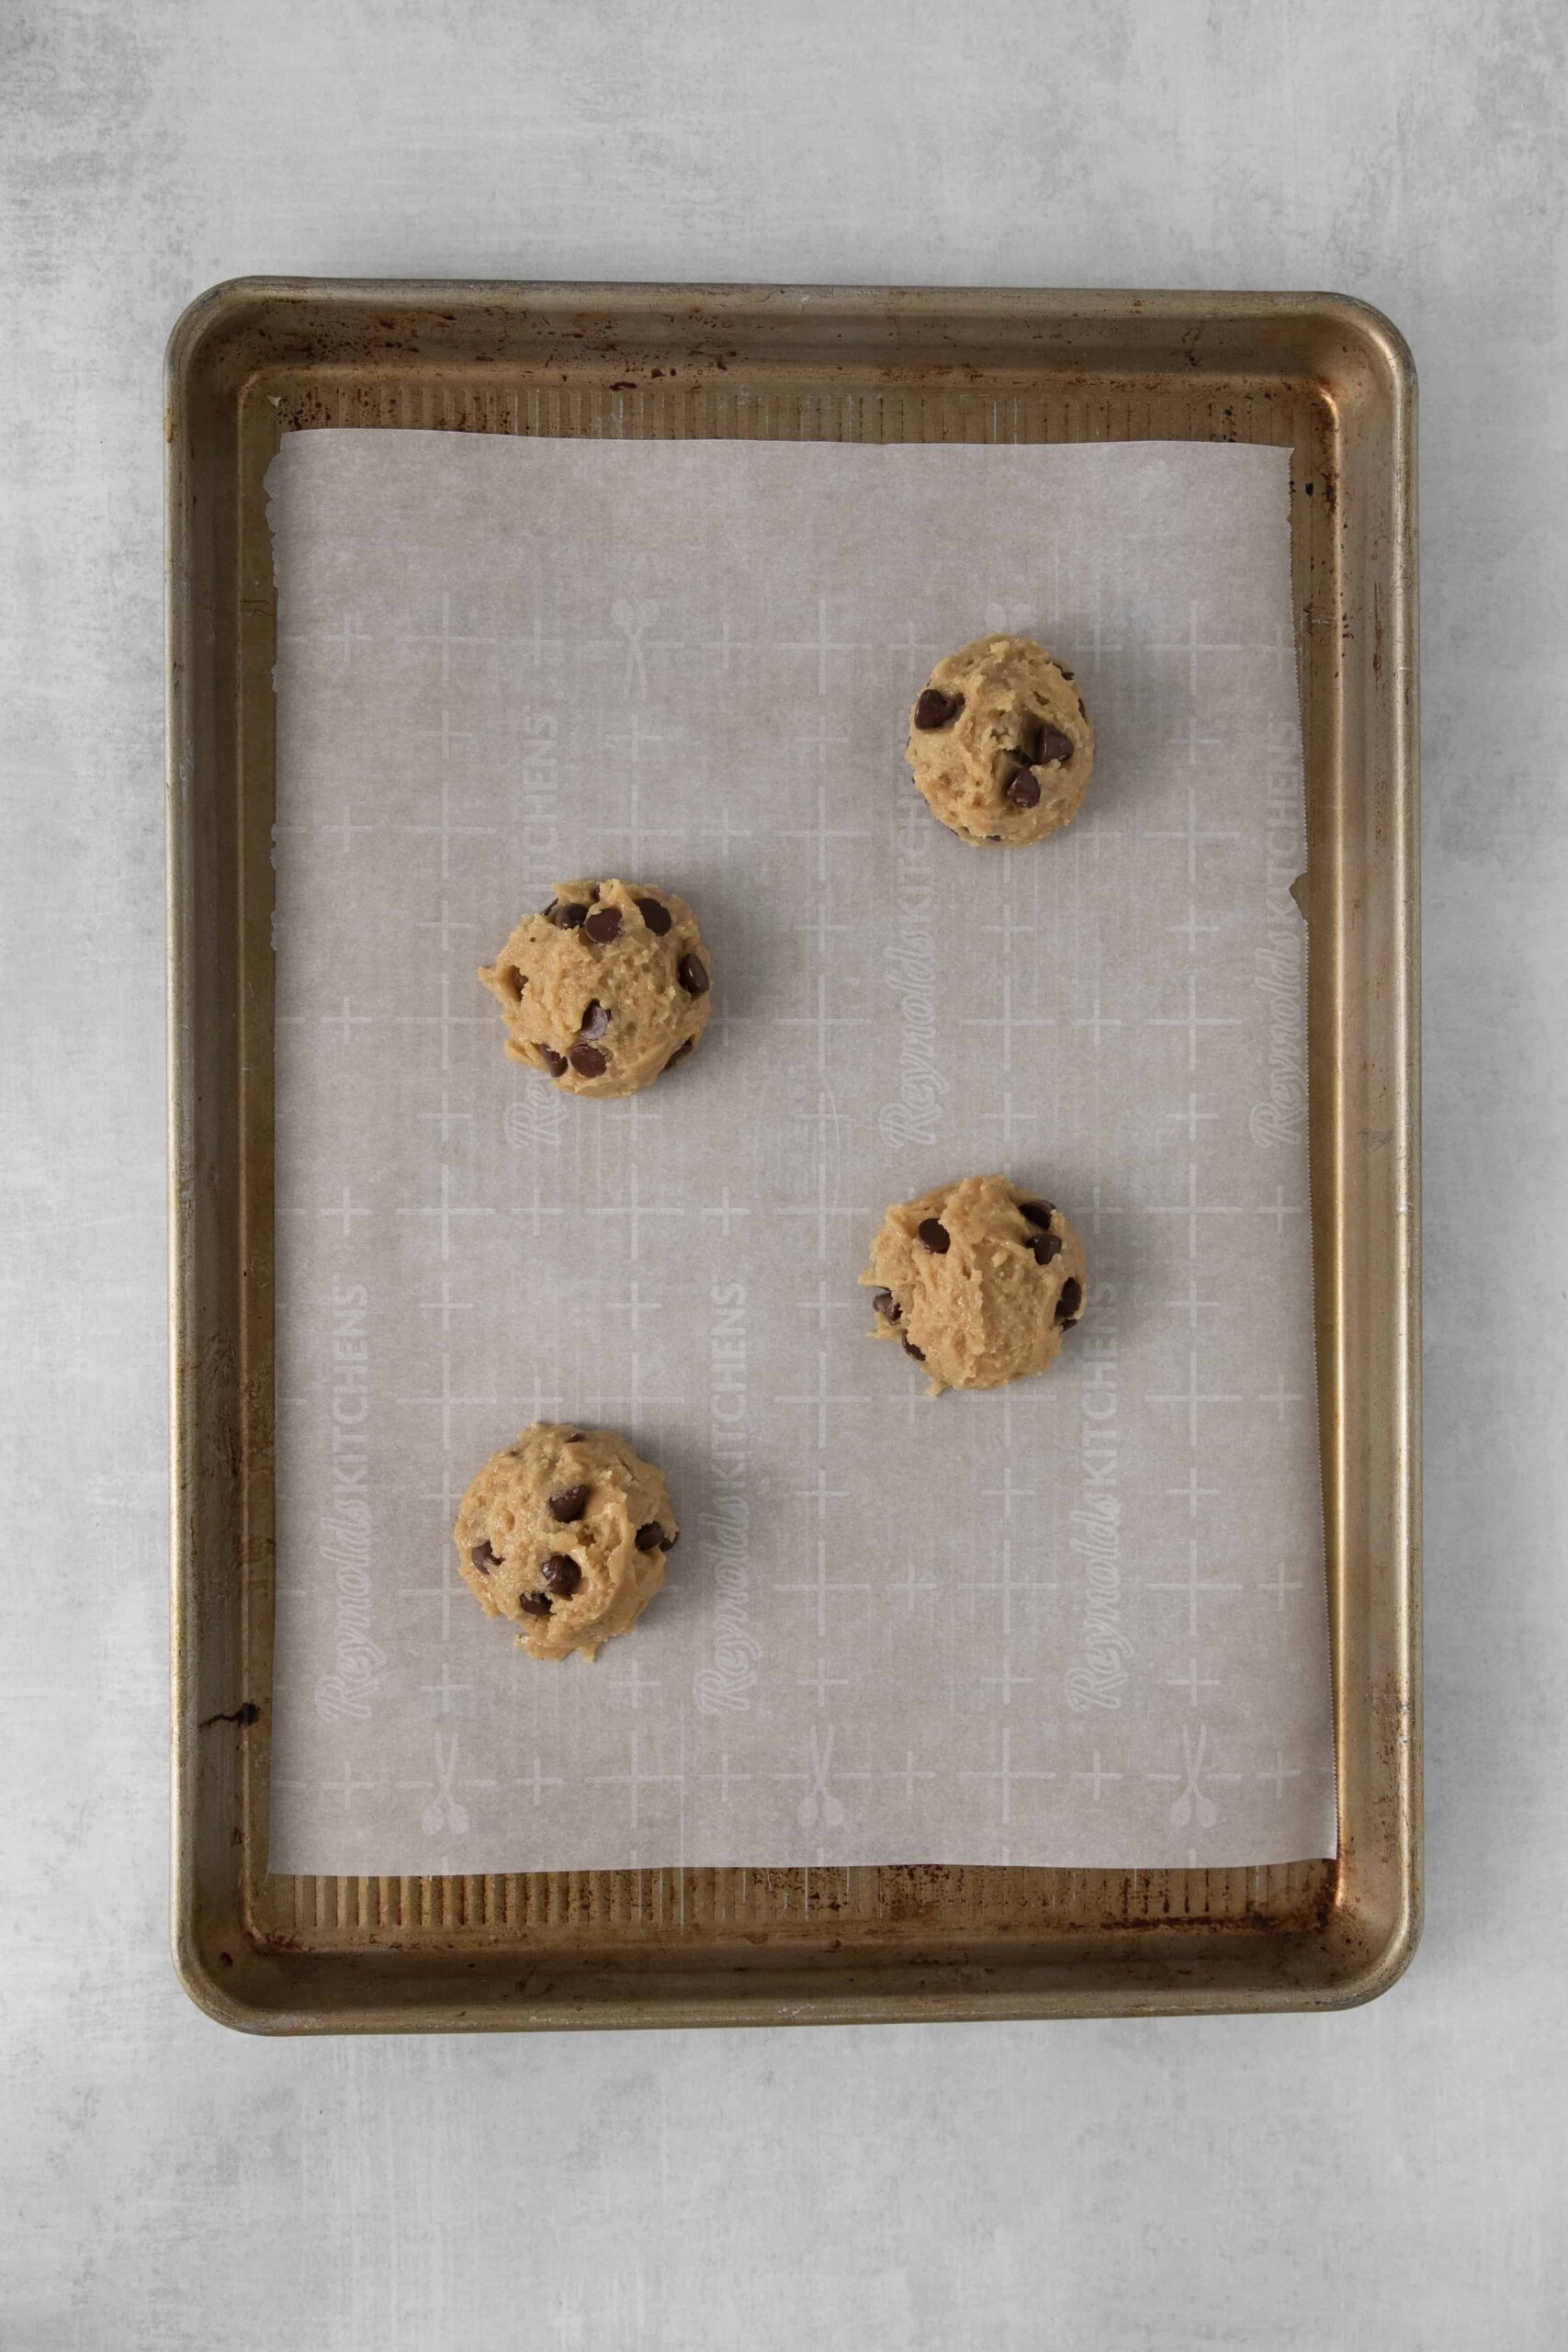 https://www.everydayfamilycooking.com/wp-content/uploads/2023/04/Chocolate-Chip-Cookies-with-No-Butter-Step-5-scaled.jpg